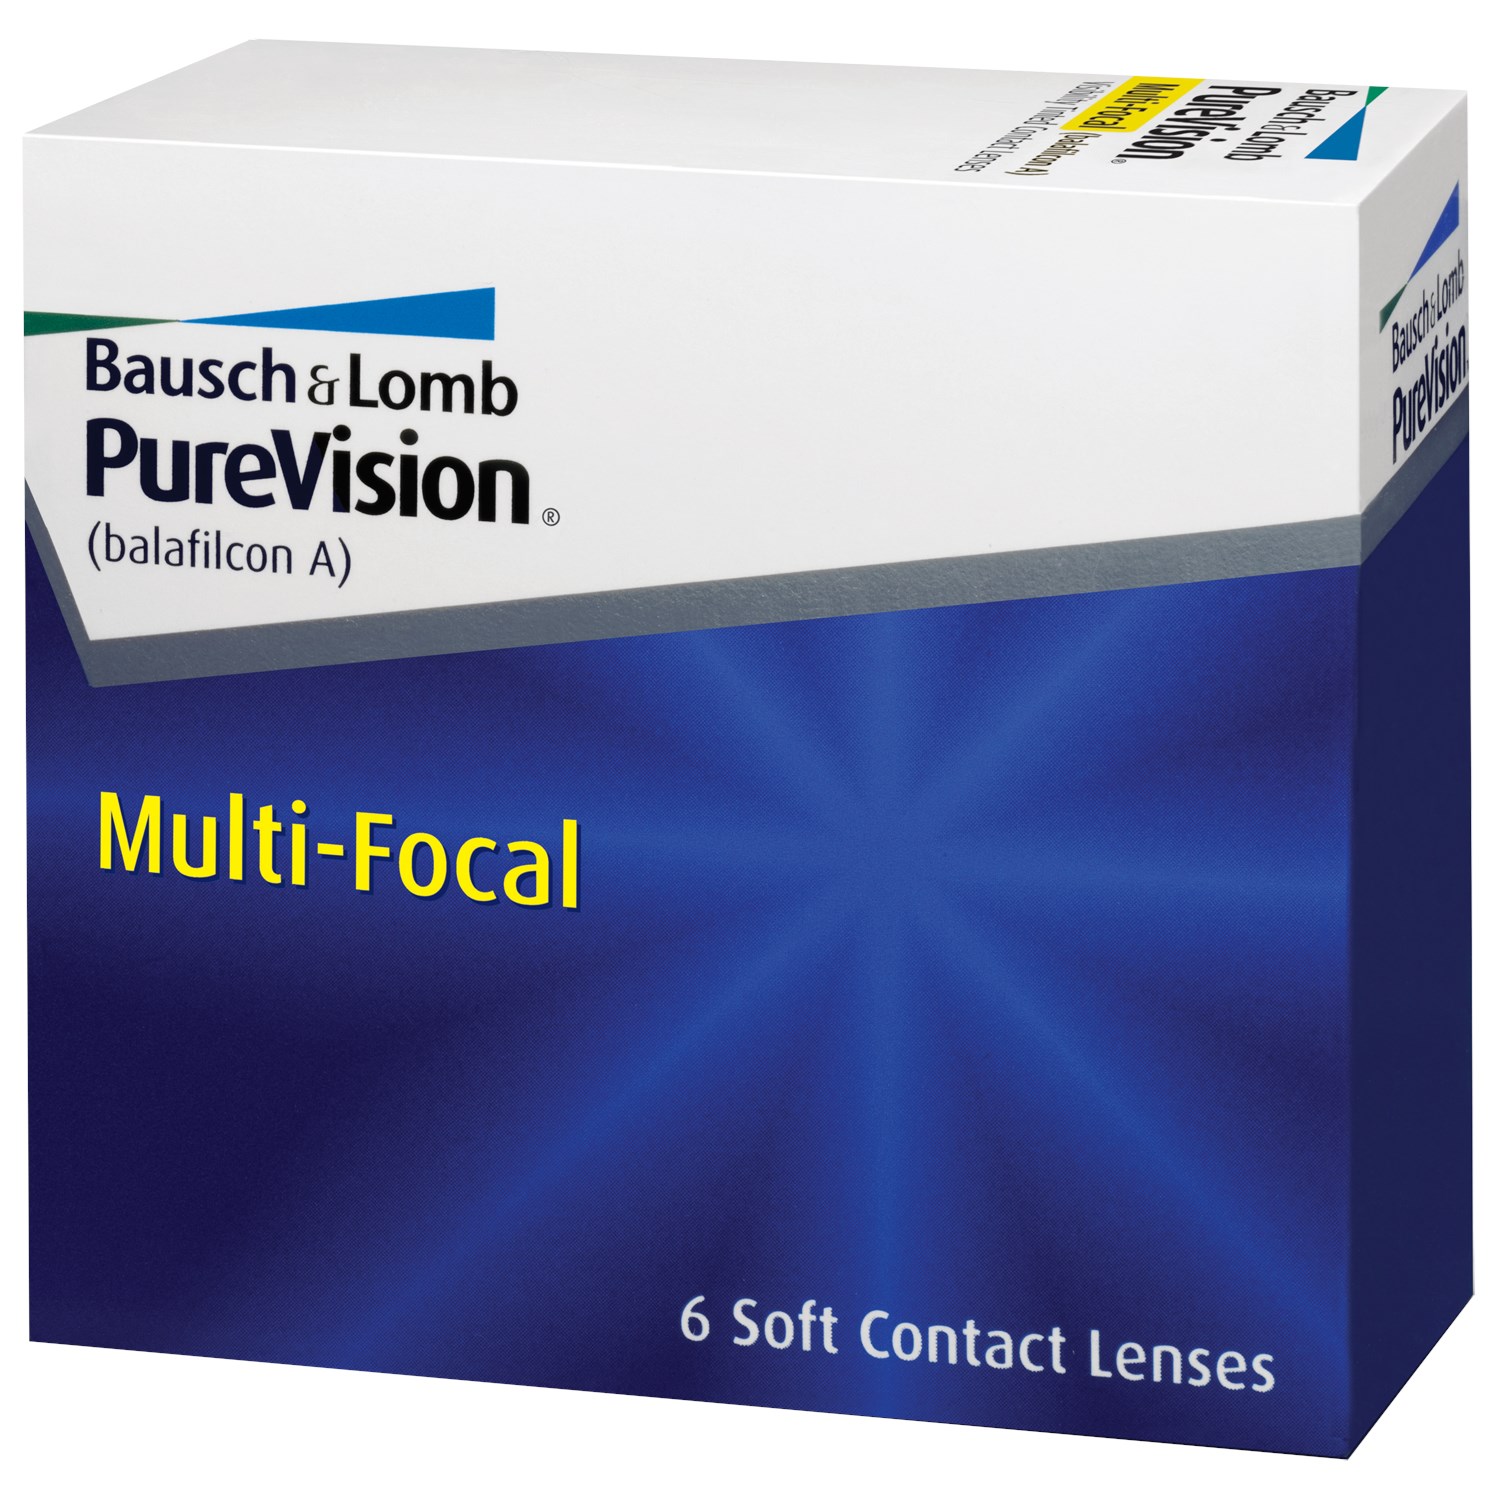 PureVision Multi-Focal contact lenses